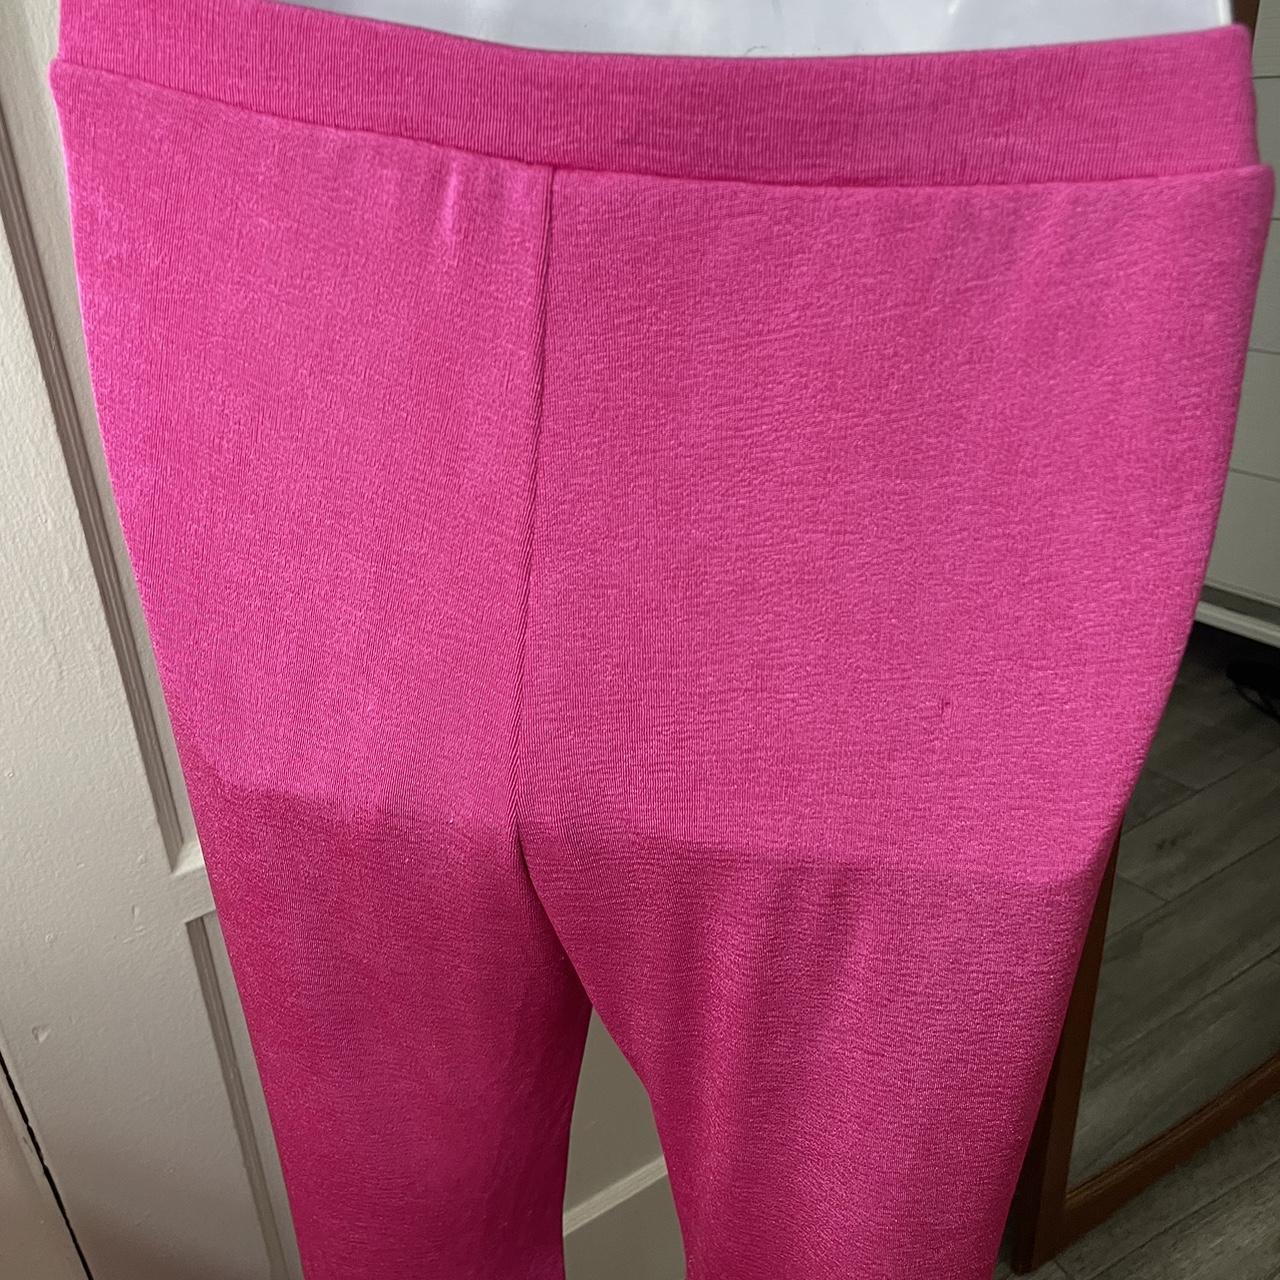 ➡️ Pink and Black High-Waisted Leggings from Target - Depop